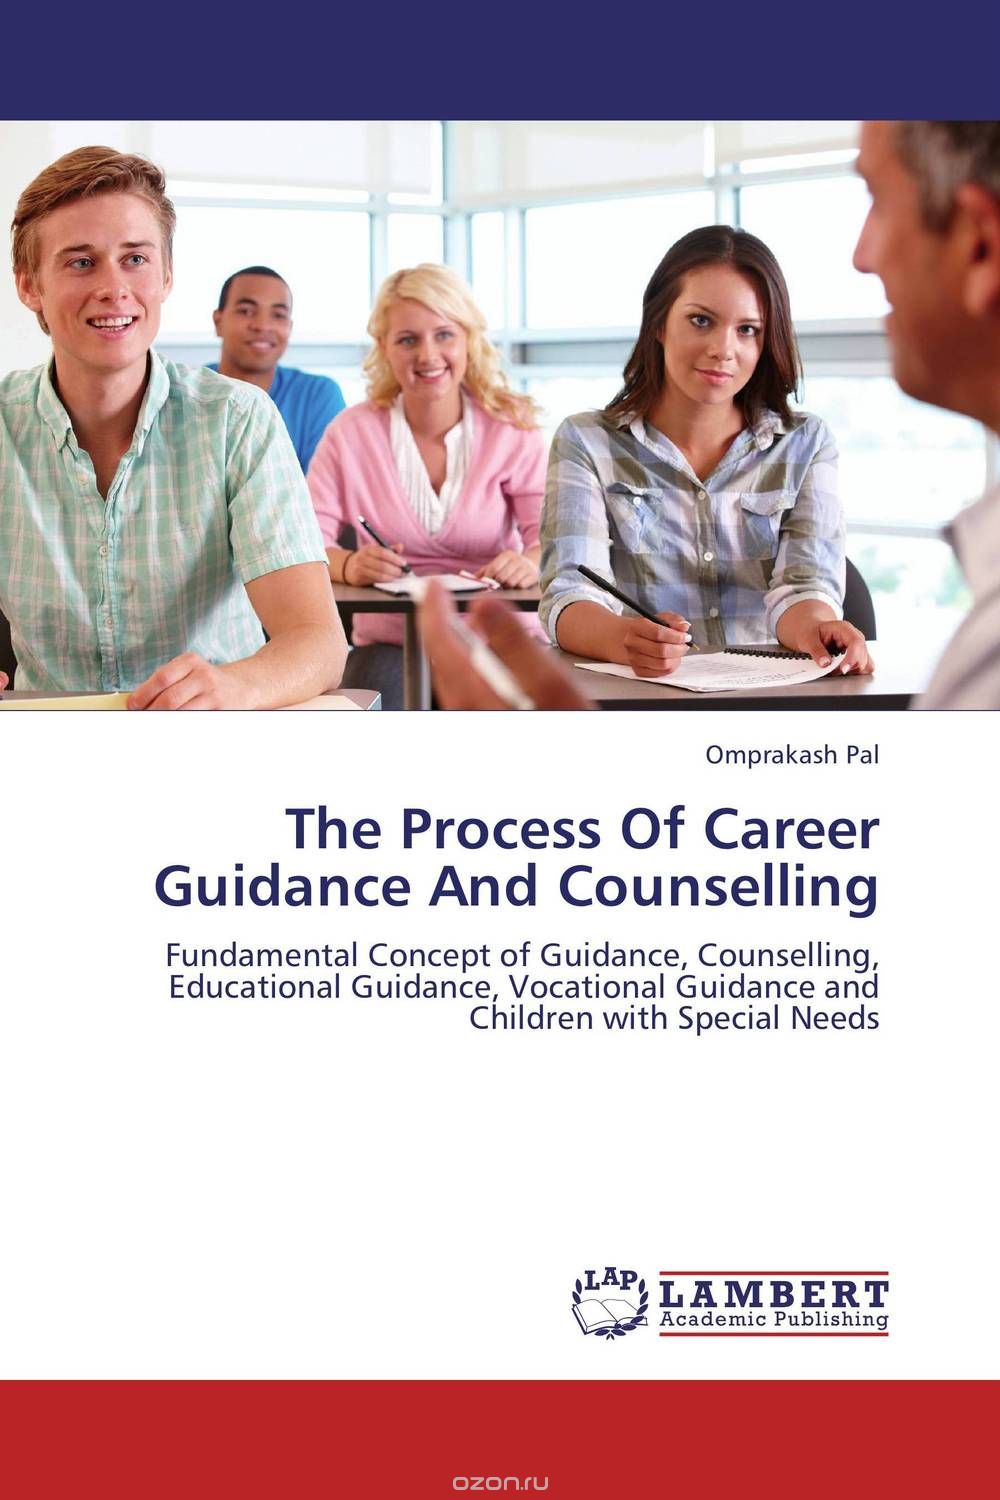 Скачать книгу "The Process Of Career Guidance And Counselling"